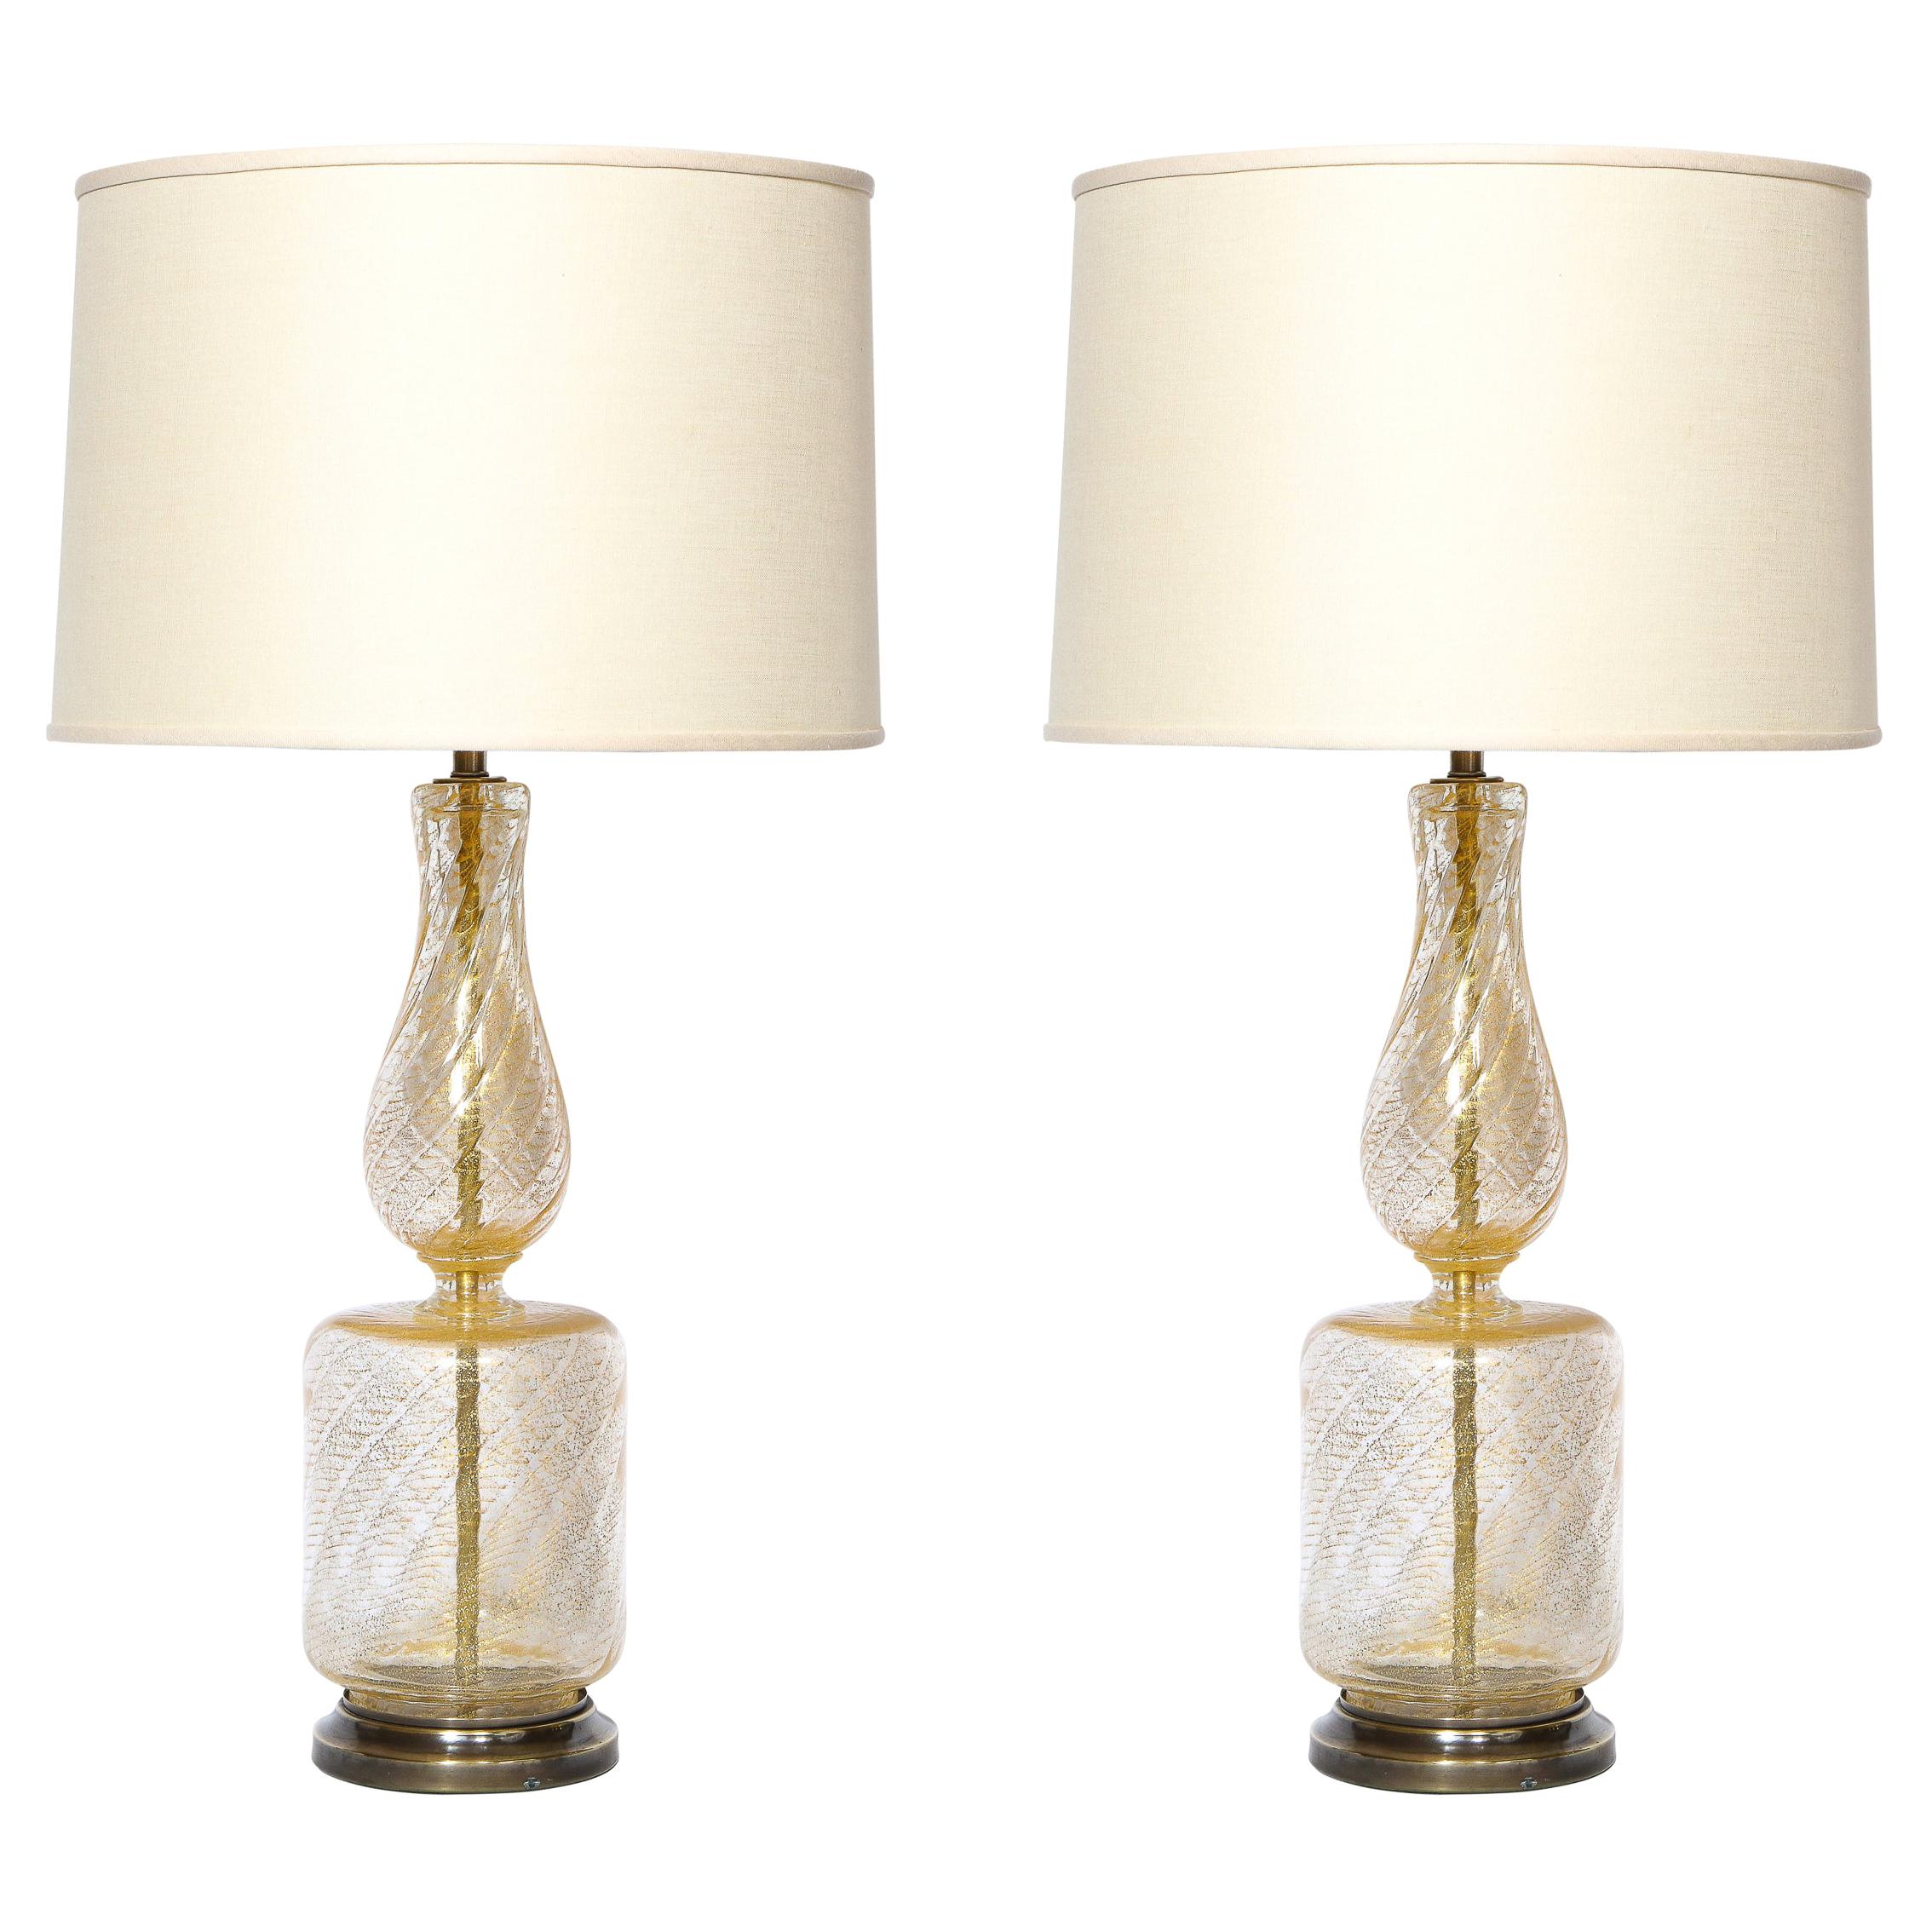 Pair of Mid Century Glass Table Lamps with 24kt Yellow Gold Flecks & Brass Bases